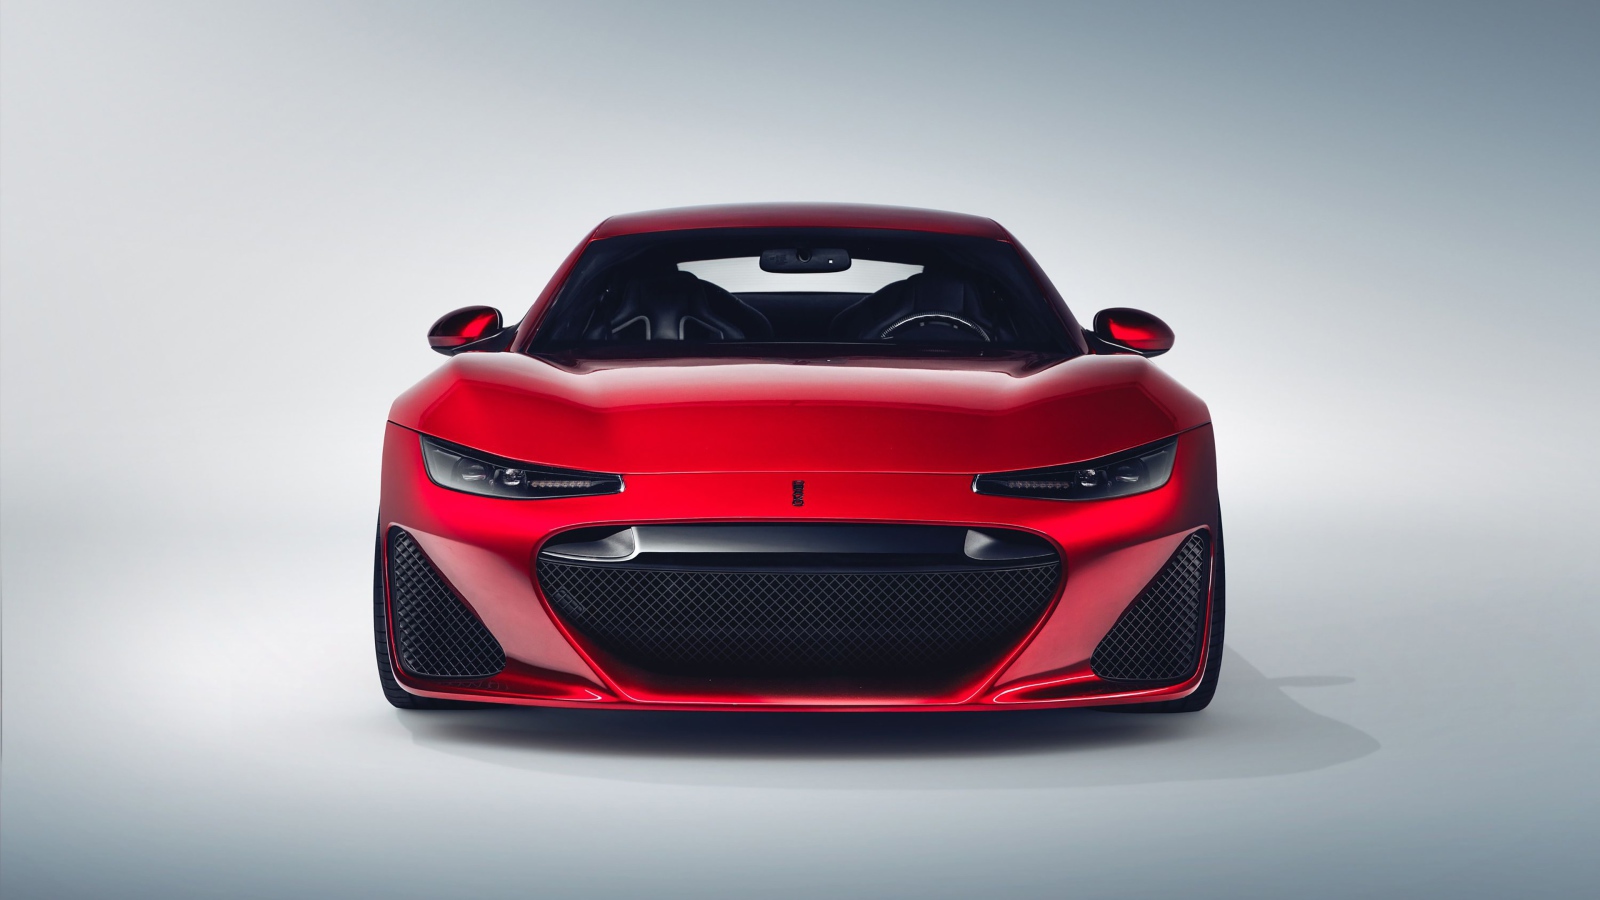 Red Drako GTE car, 2020 front view